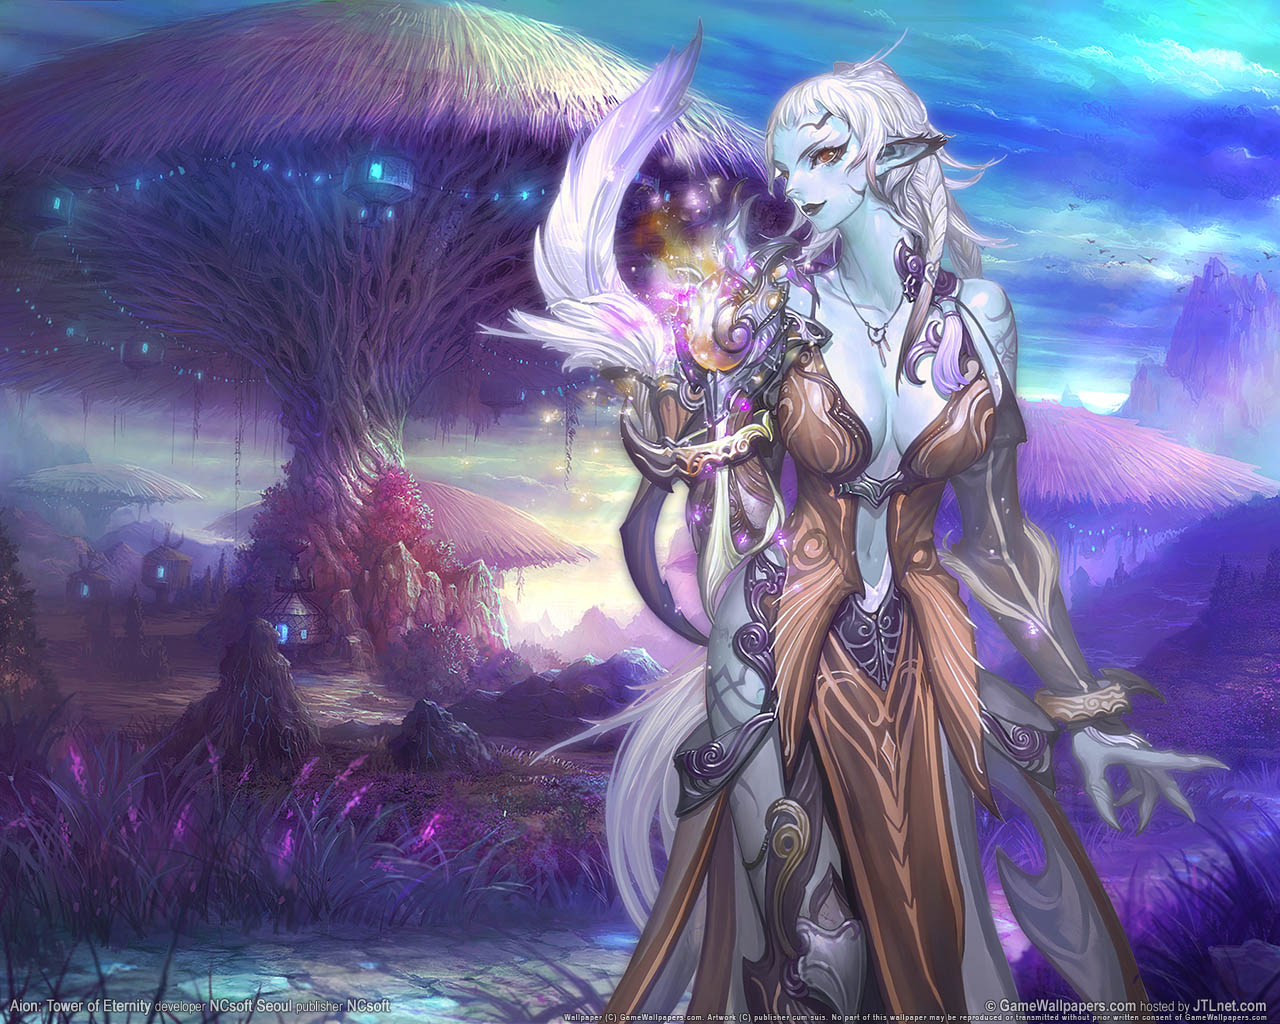 Aion%25253A Tower of Eternity wallpaper 10 1280x1024